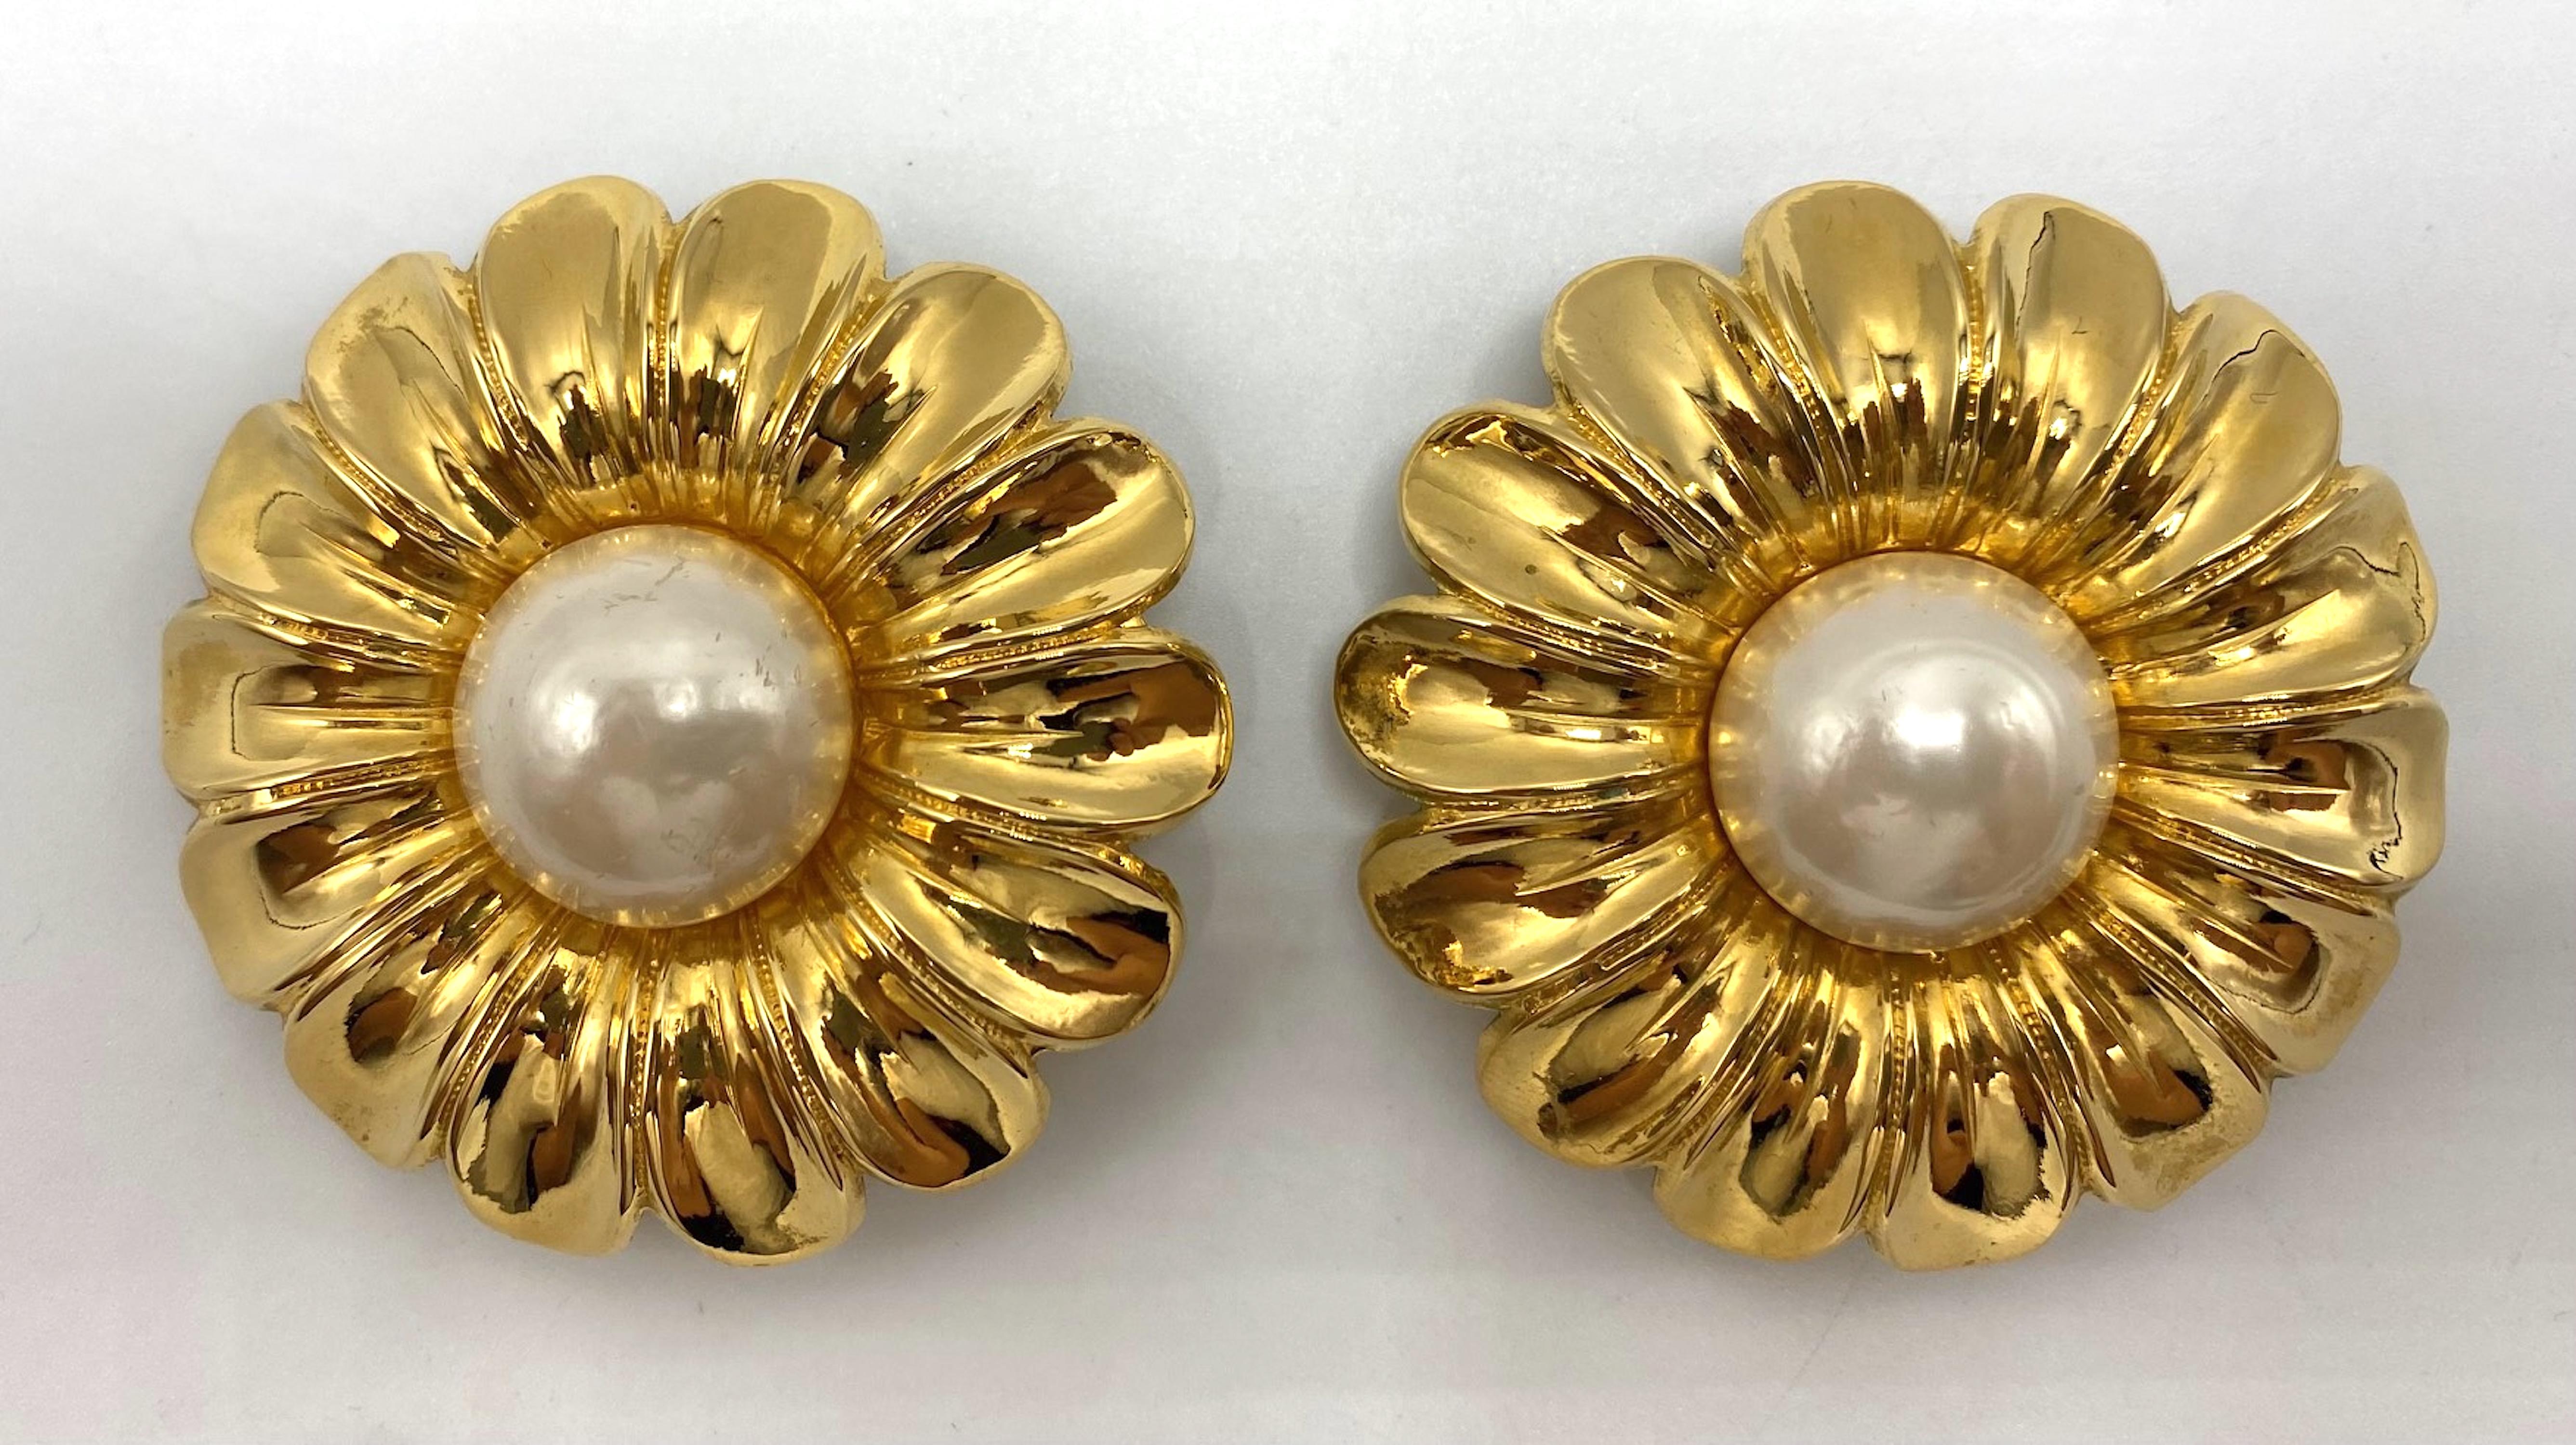 Presented is a pair of mid 1980s large gold margarita flower earrings by Chanel. The clip earrings are done in bright 18K gold plate with a faux Baroque pearl cabochon center. Each earring measures 2.38 inches in diameter and .5 of an inch high.